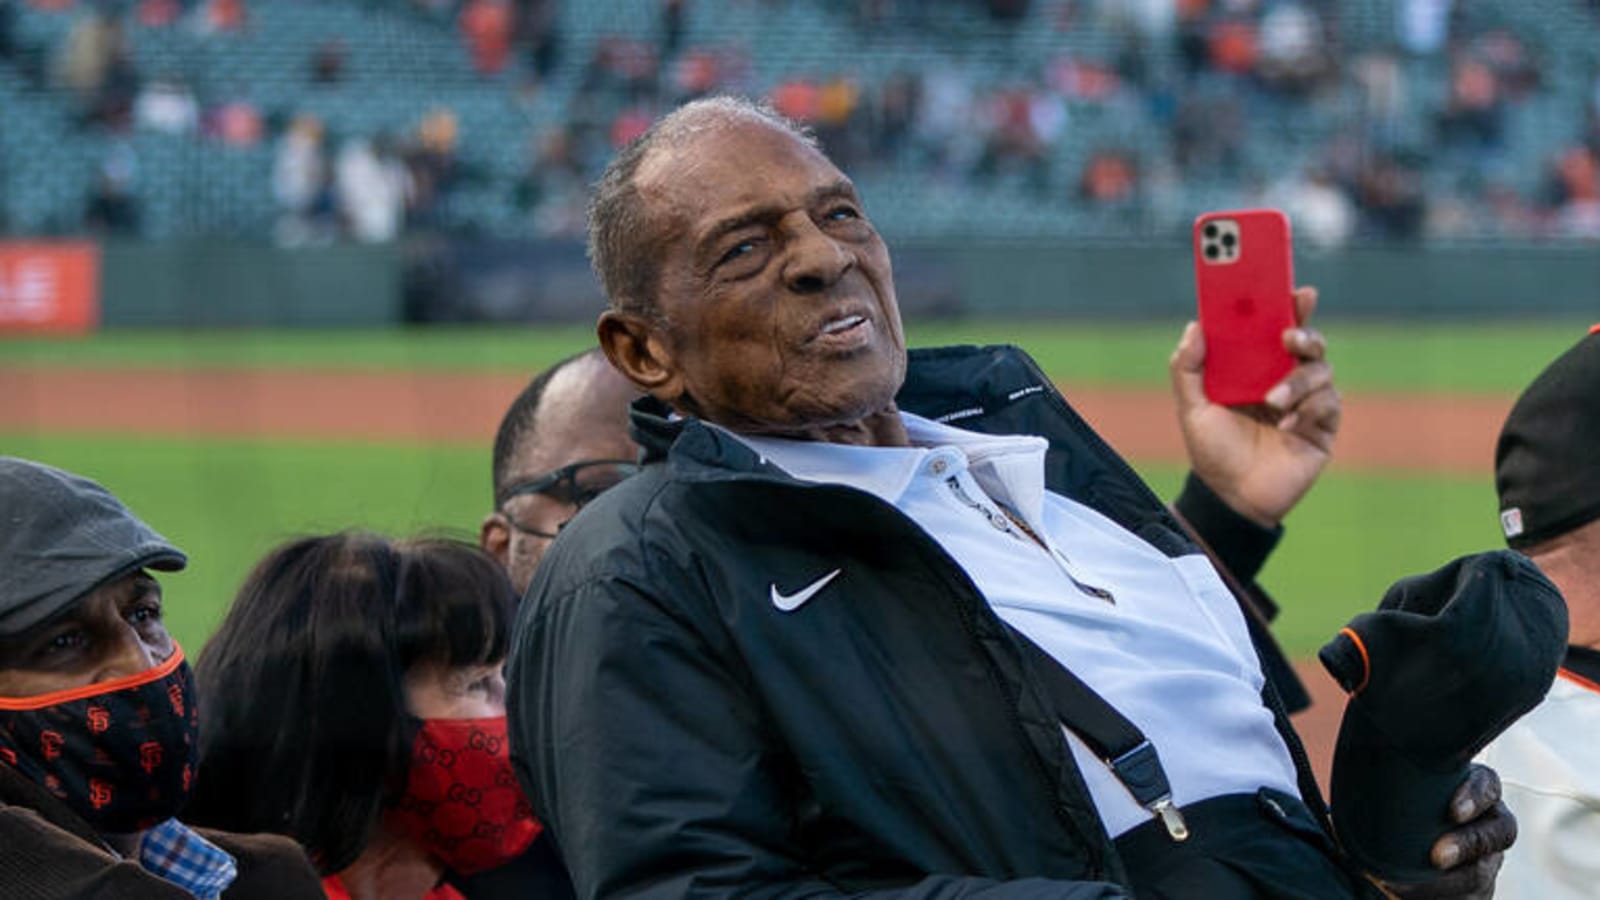 Mets retire Willie Mays' number in surprise ceremony